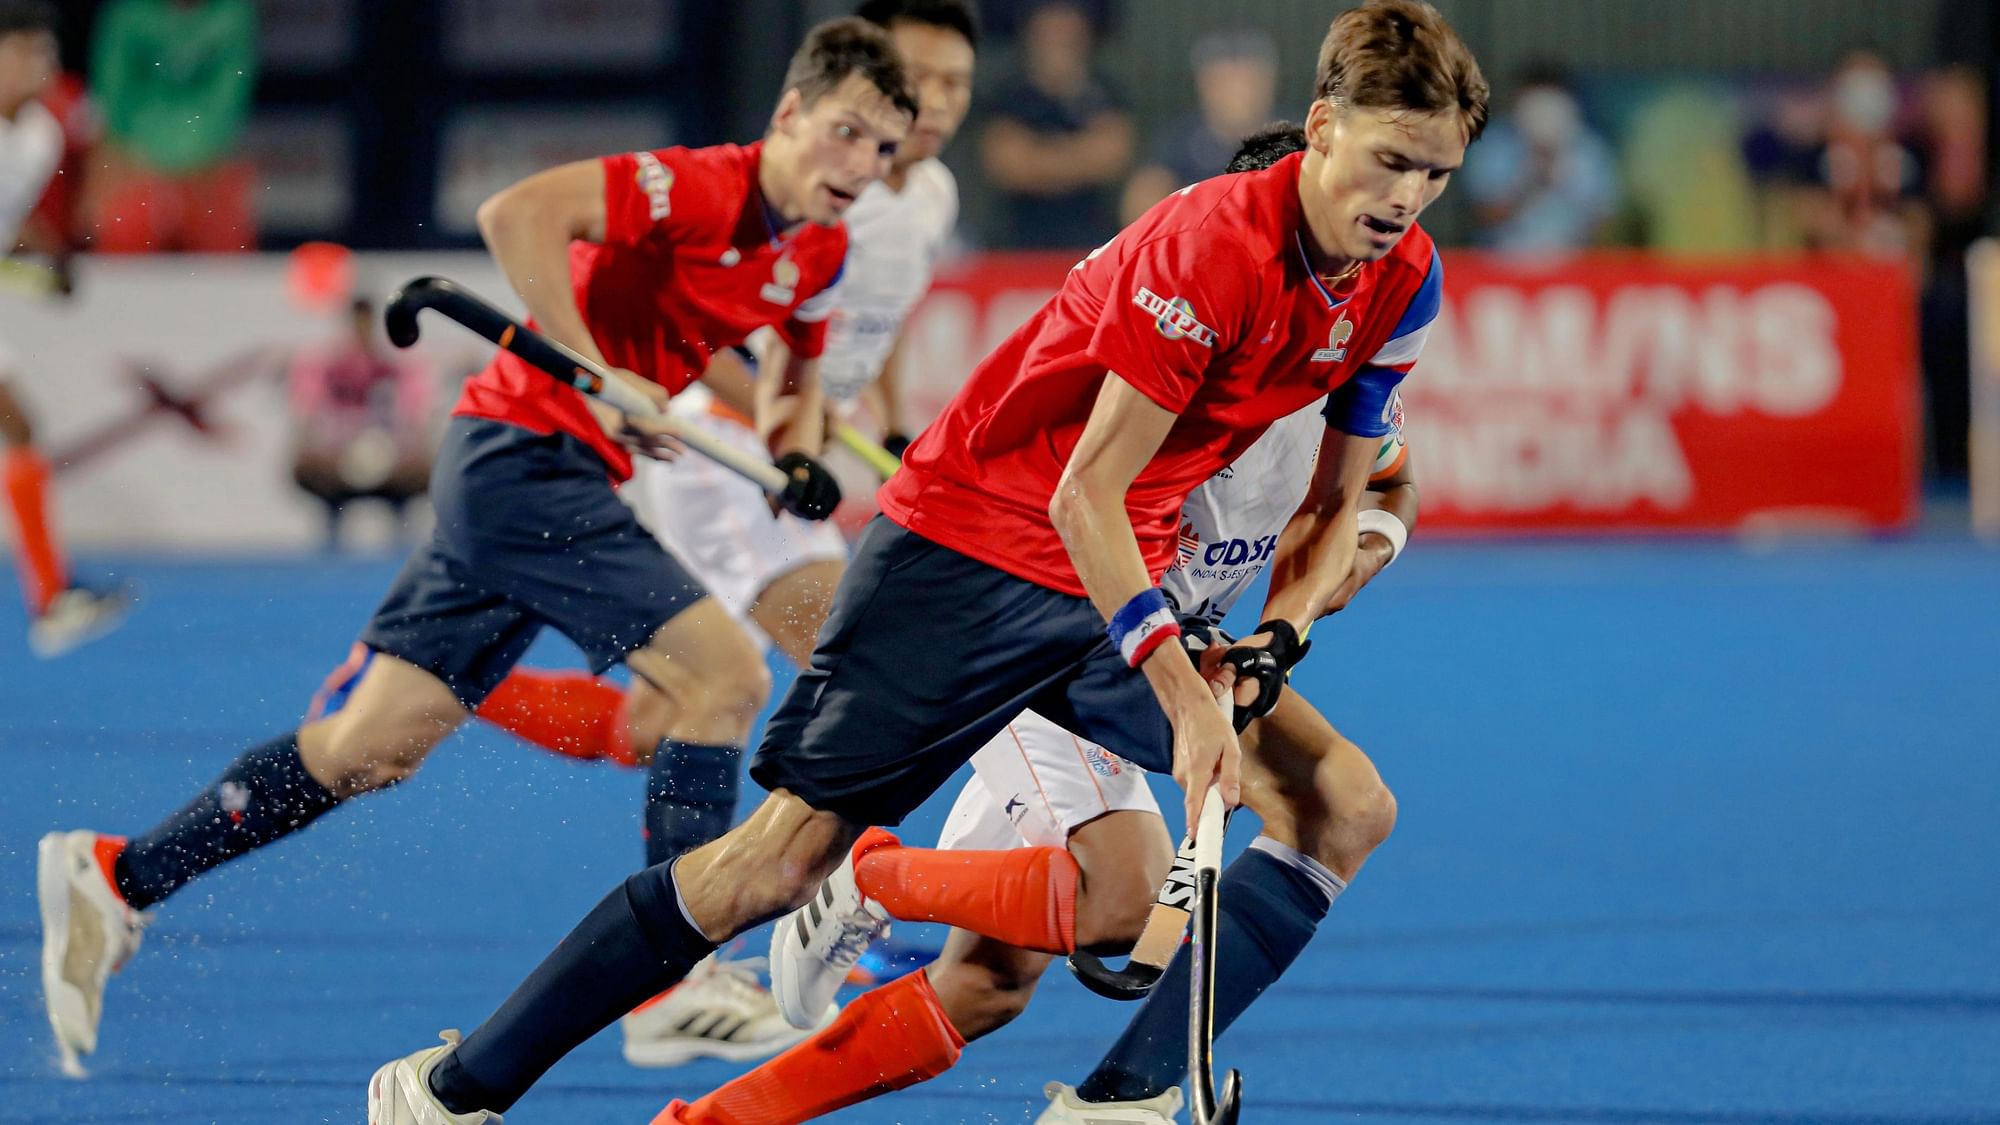 <div class="paragraphs"><p>France beat India 5-4 in both teams' first match of the 2021 Junior Men's Hockey World Cup.</p></div>